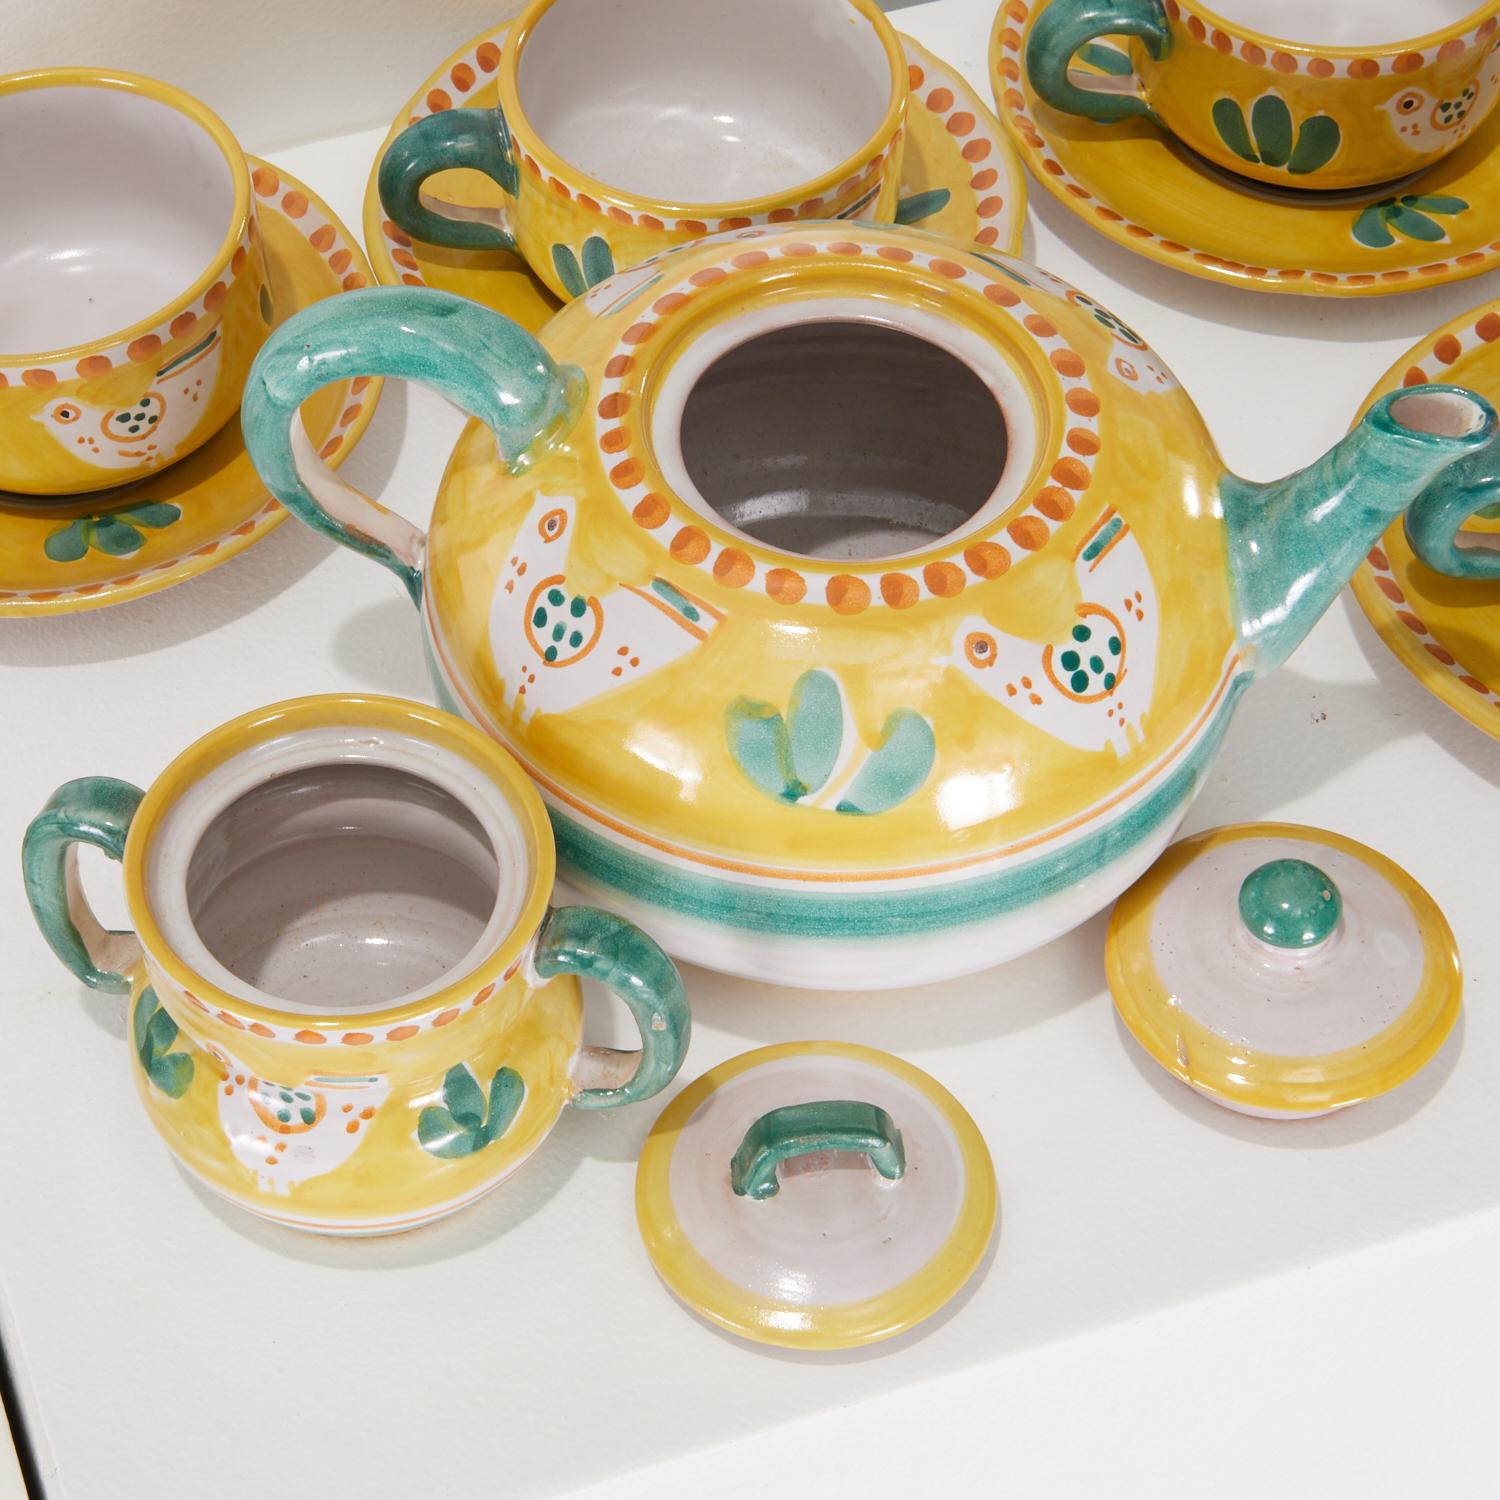 Solimene Vietri, 'Decoro Campagna' Hand Painted Italian Pottery Tea Set for 16 In Good Condition For Sale In Morristown, NJ